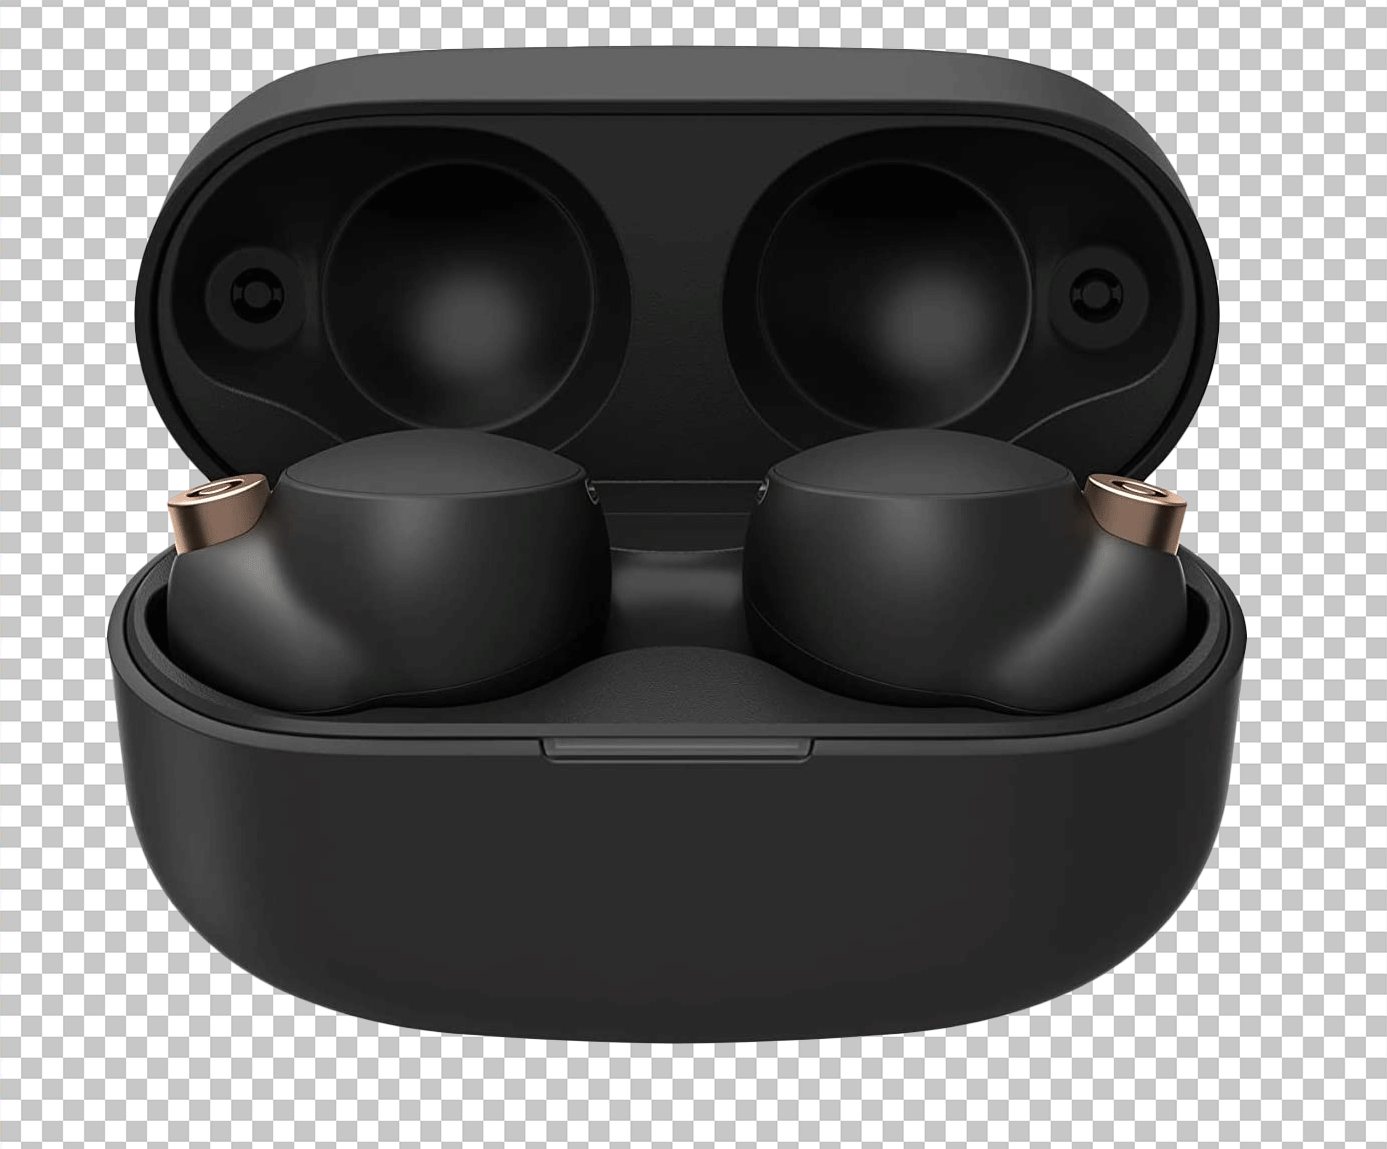 Sony Black earbuds PNG image